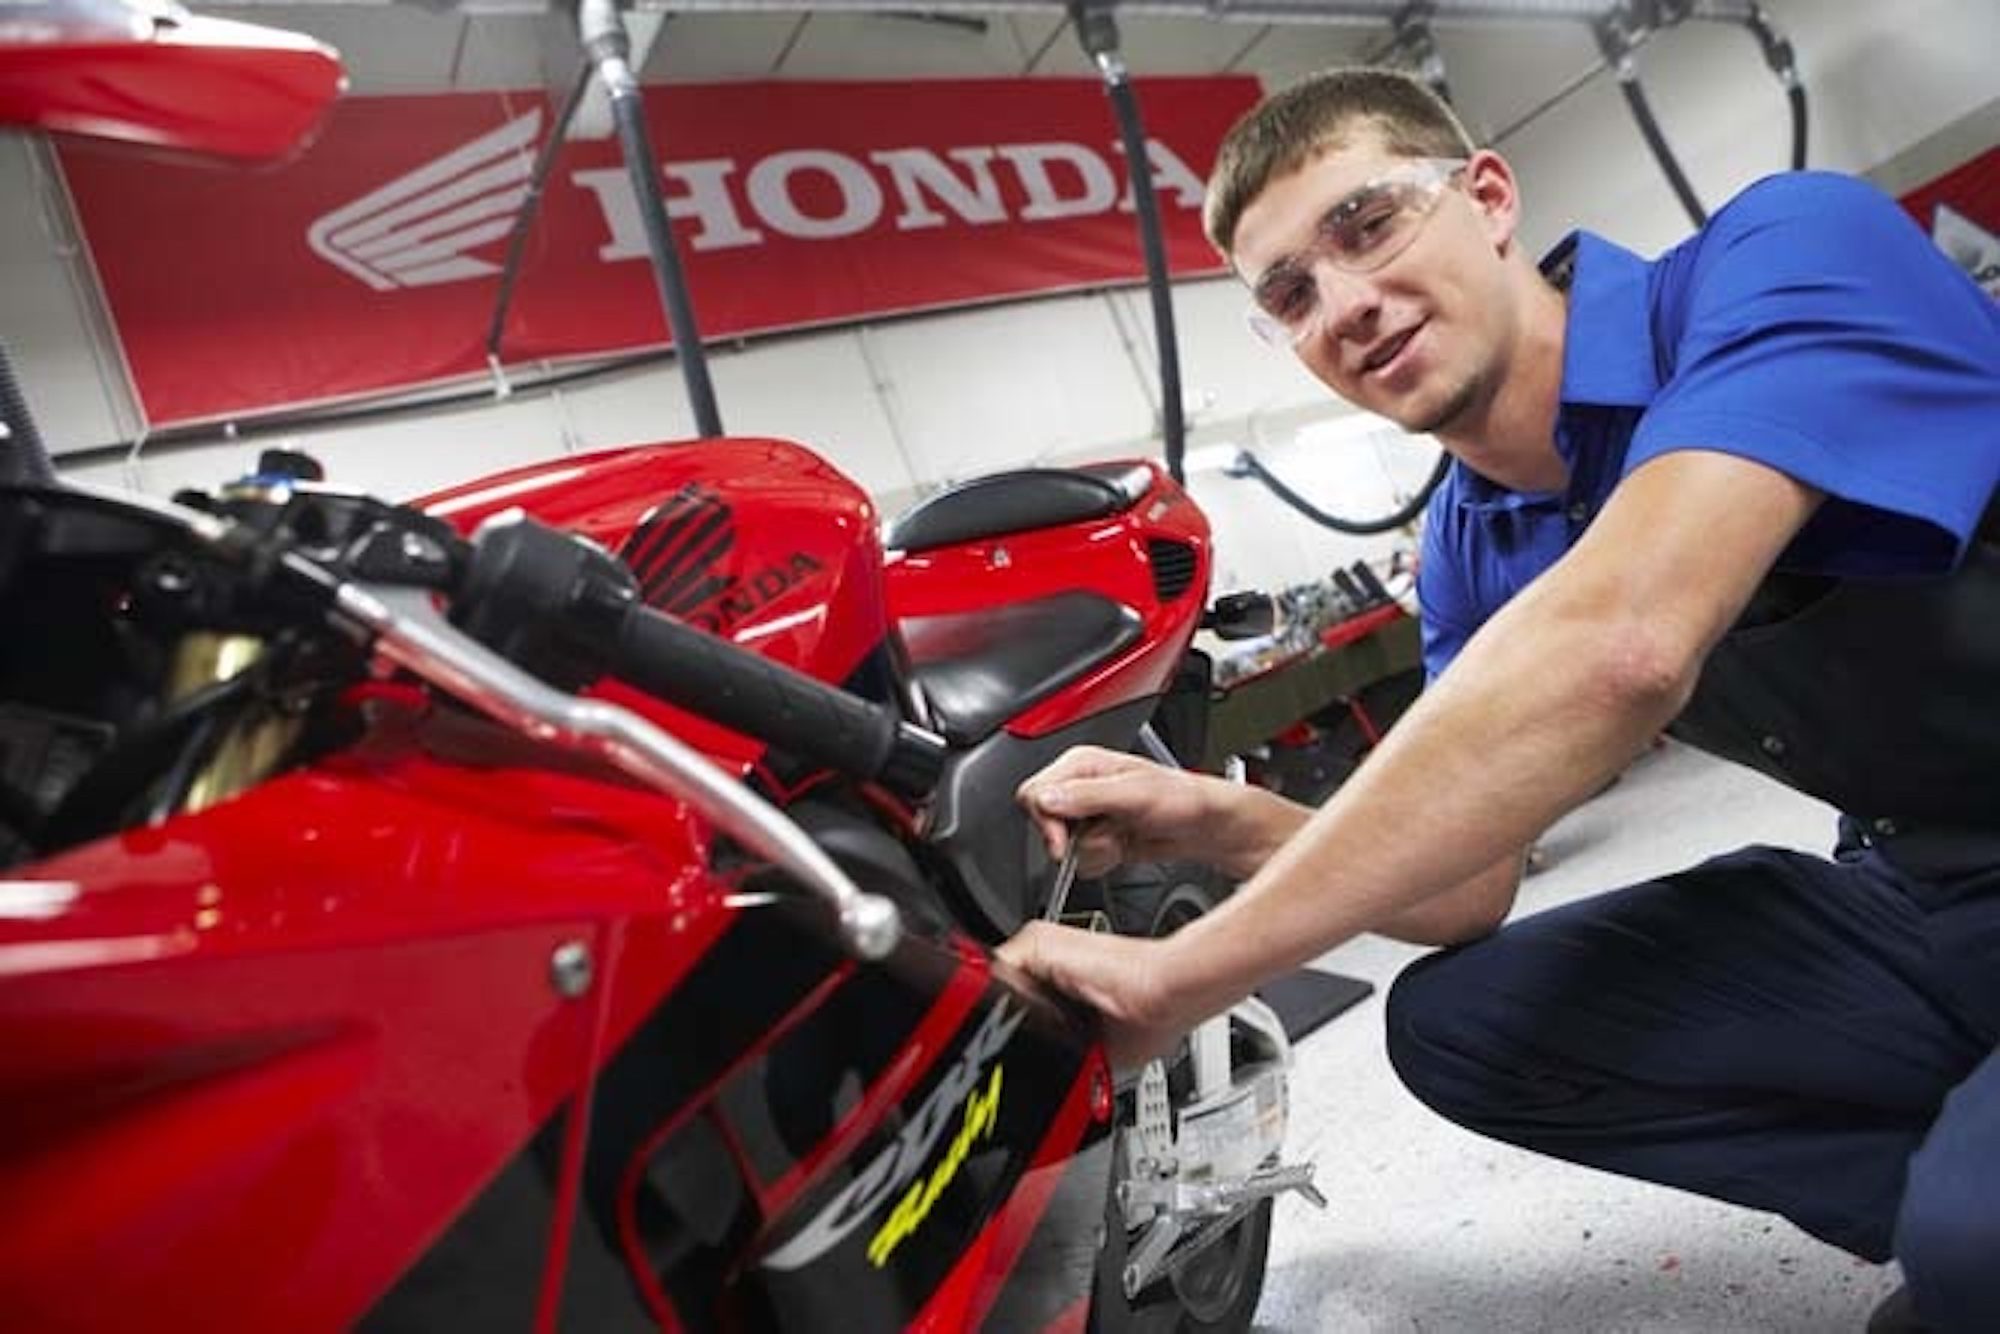 A Honda Motorcycle Technician. Media sourced from Pinterest.